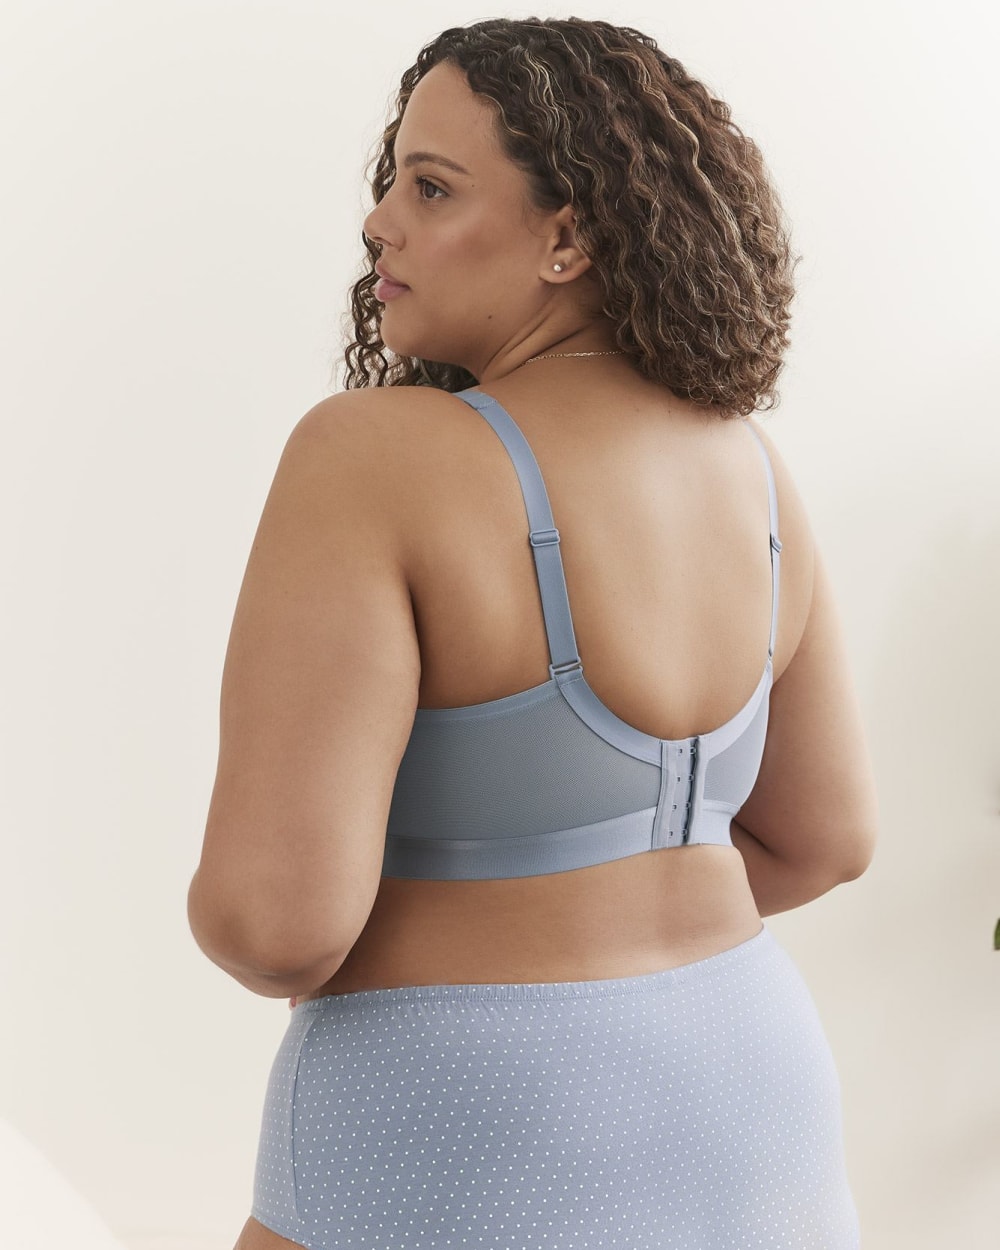 Sexy Invisible Corset Bras For Side Set With Open Back And Push Up Back  Perfect For Yoga, Fitness, And Gatherings From Annayplusal, $9.5